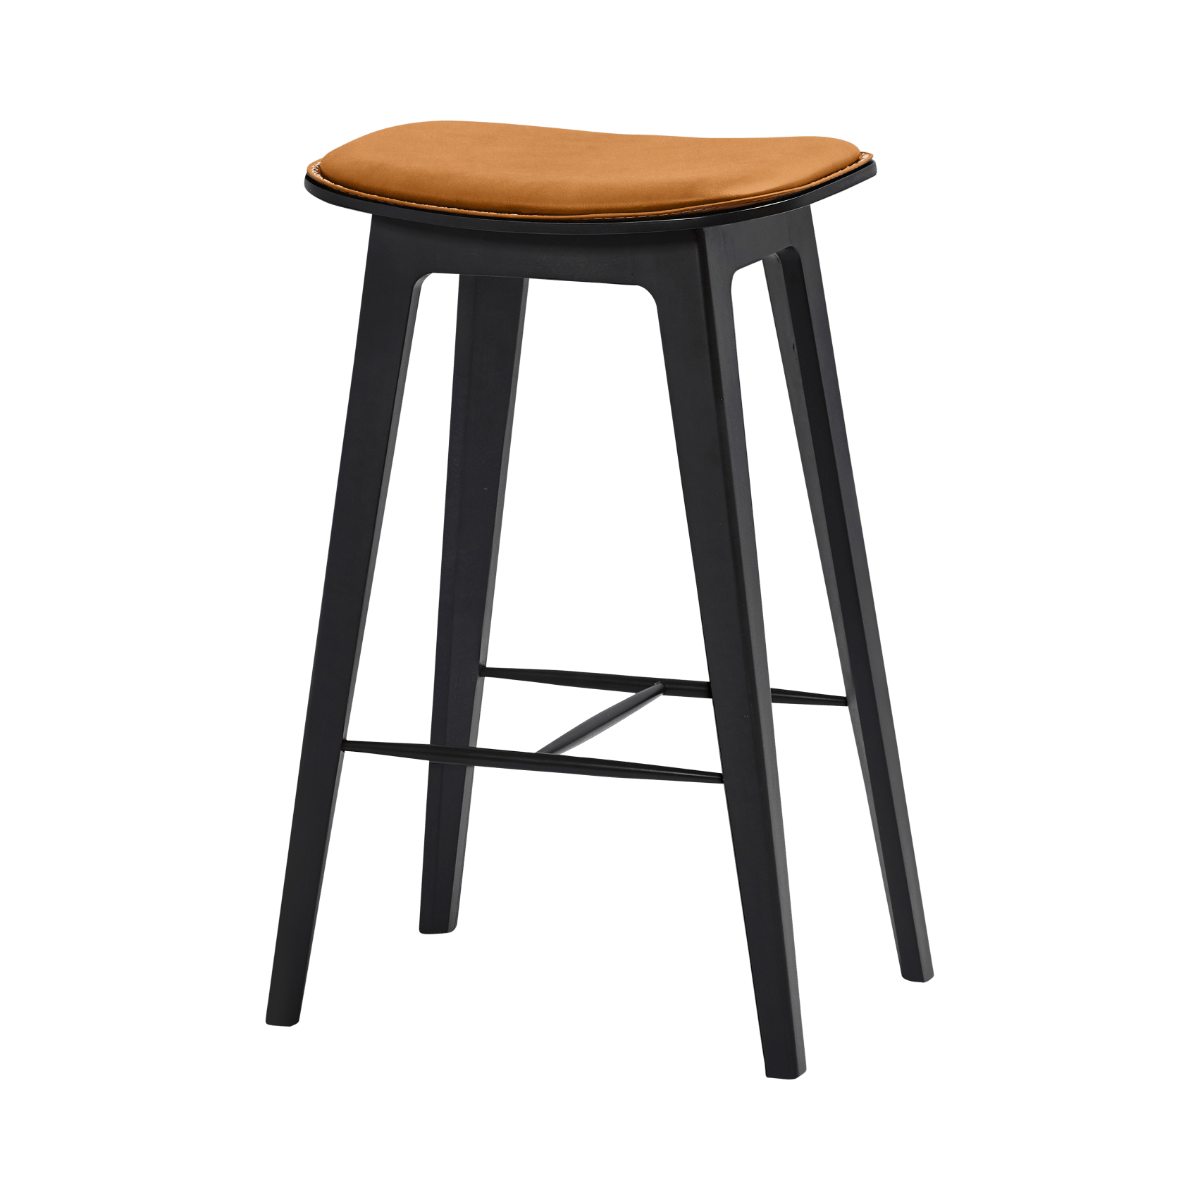 variant_8593214% | Nordic Bar Stool - Beech with stitches [Contract] - 73 cm Luna Sandstone | SACKit